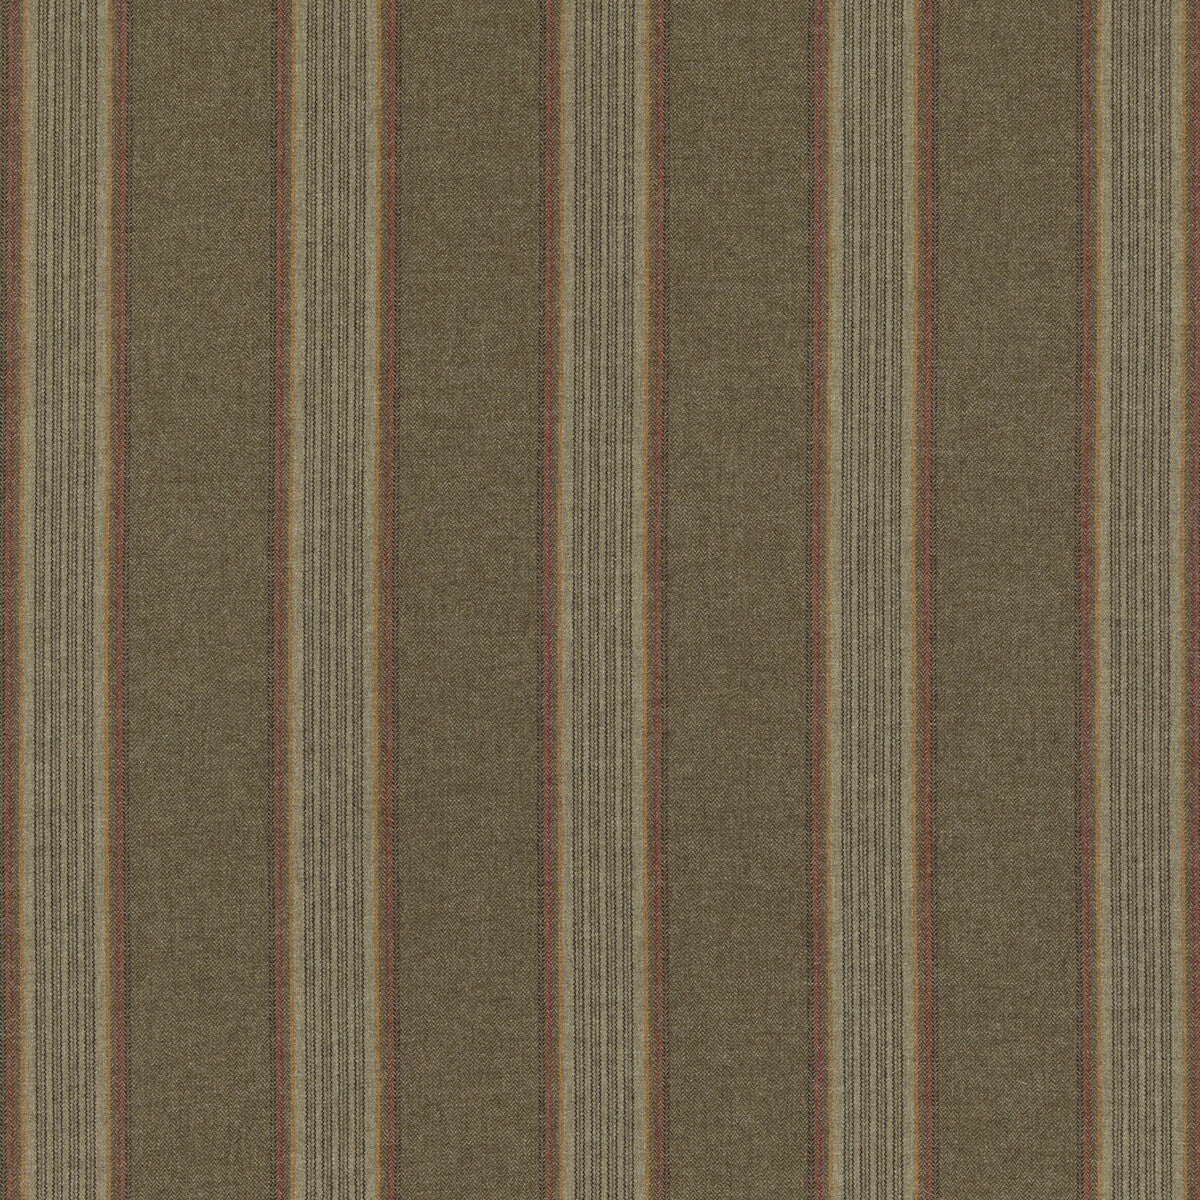 Moray Stripe fabric in lovat color - pattern FD808.R106.0 - by Mulberry in the Mulberry Wools IV collection